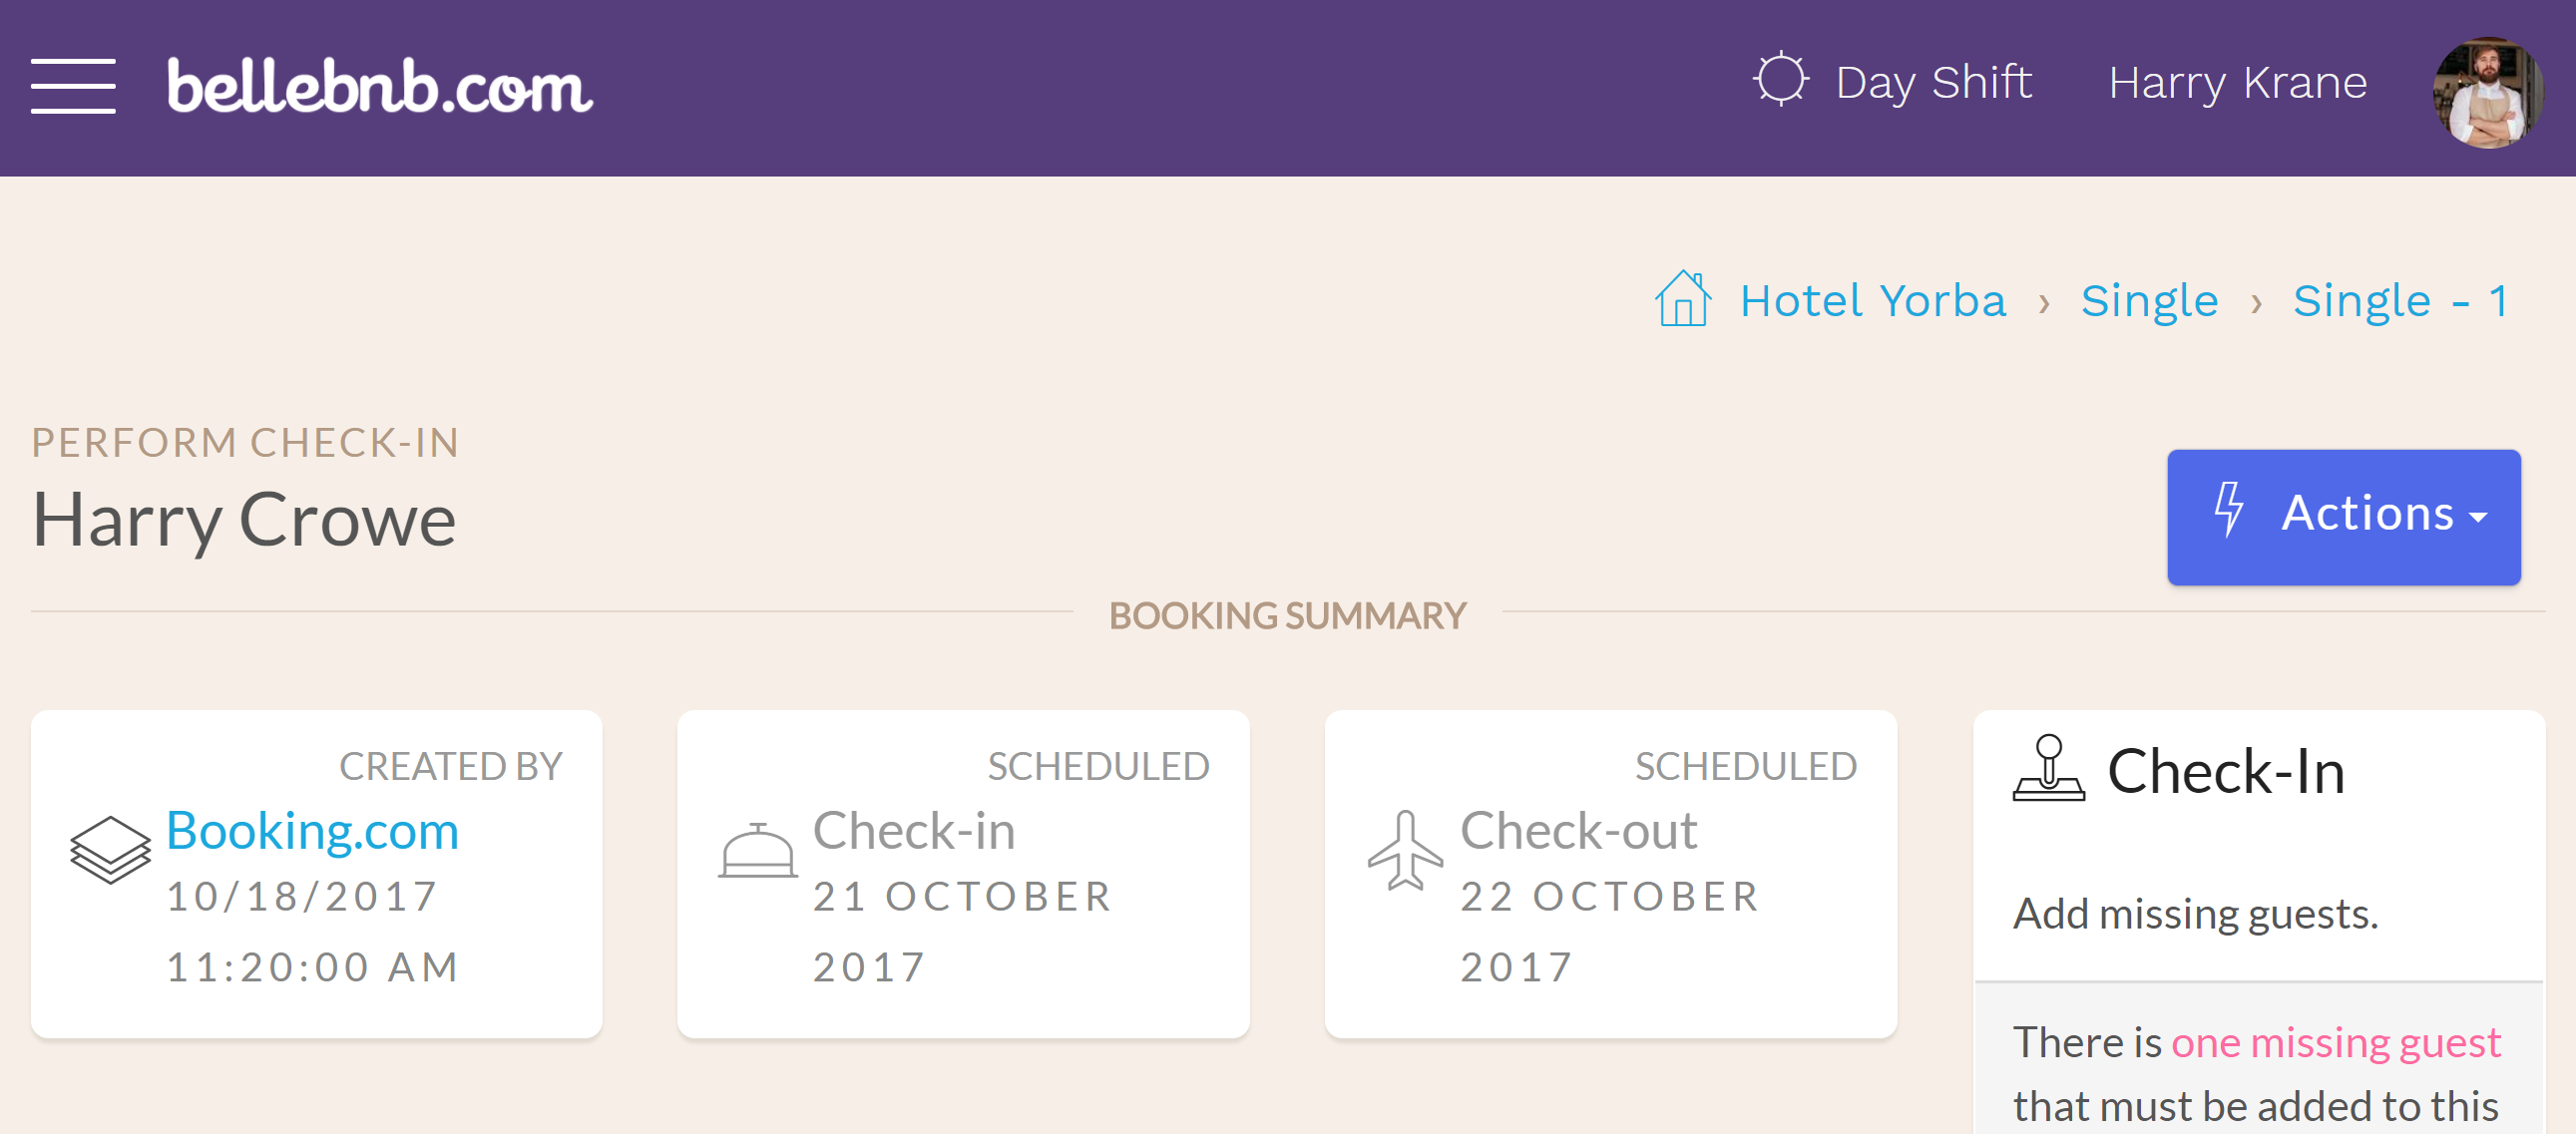 Hotel Price Match The Front Desk manager provides helpful tips and notifications along the right side of a reservation’s details view. One that’s very important is the ‘Price Match’ notification, which concerns bookings that were received from exterior channels, like Booking.com and Airbnb.